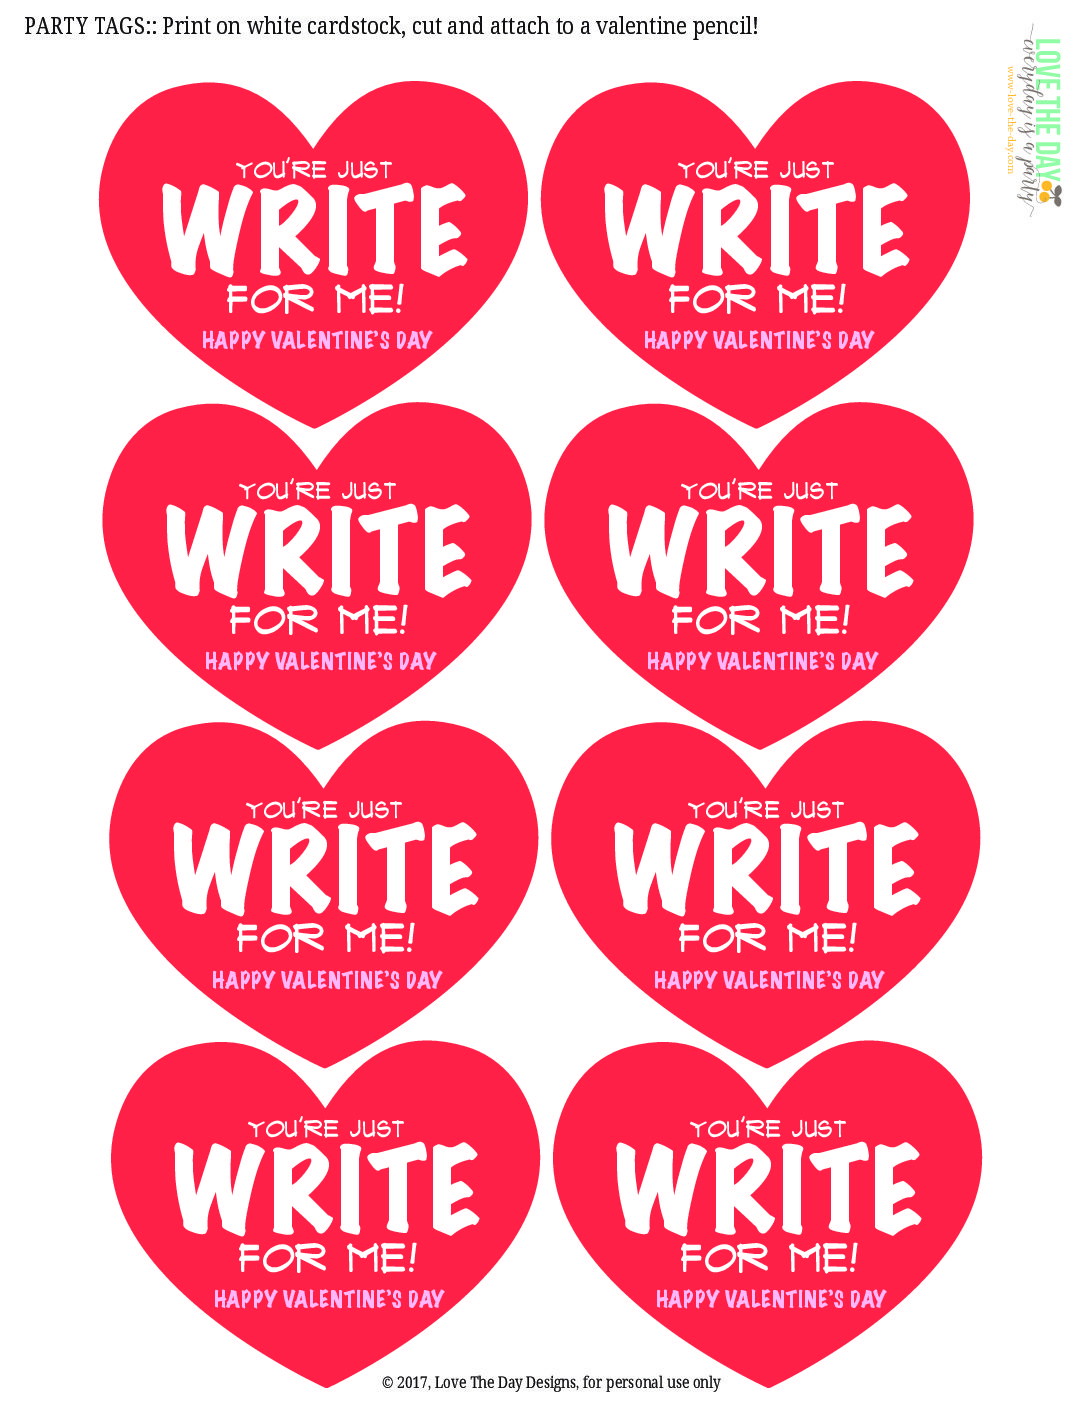 ?YOU?RE JUST WRITE FOR ME? PENCIL VALENTINE TAG